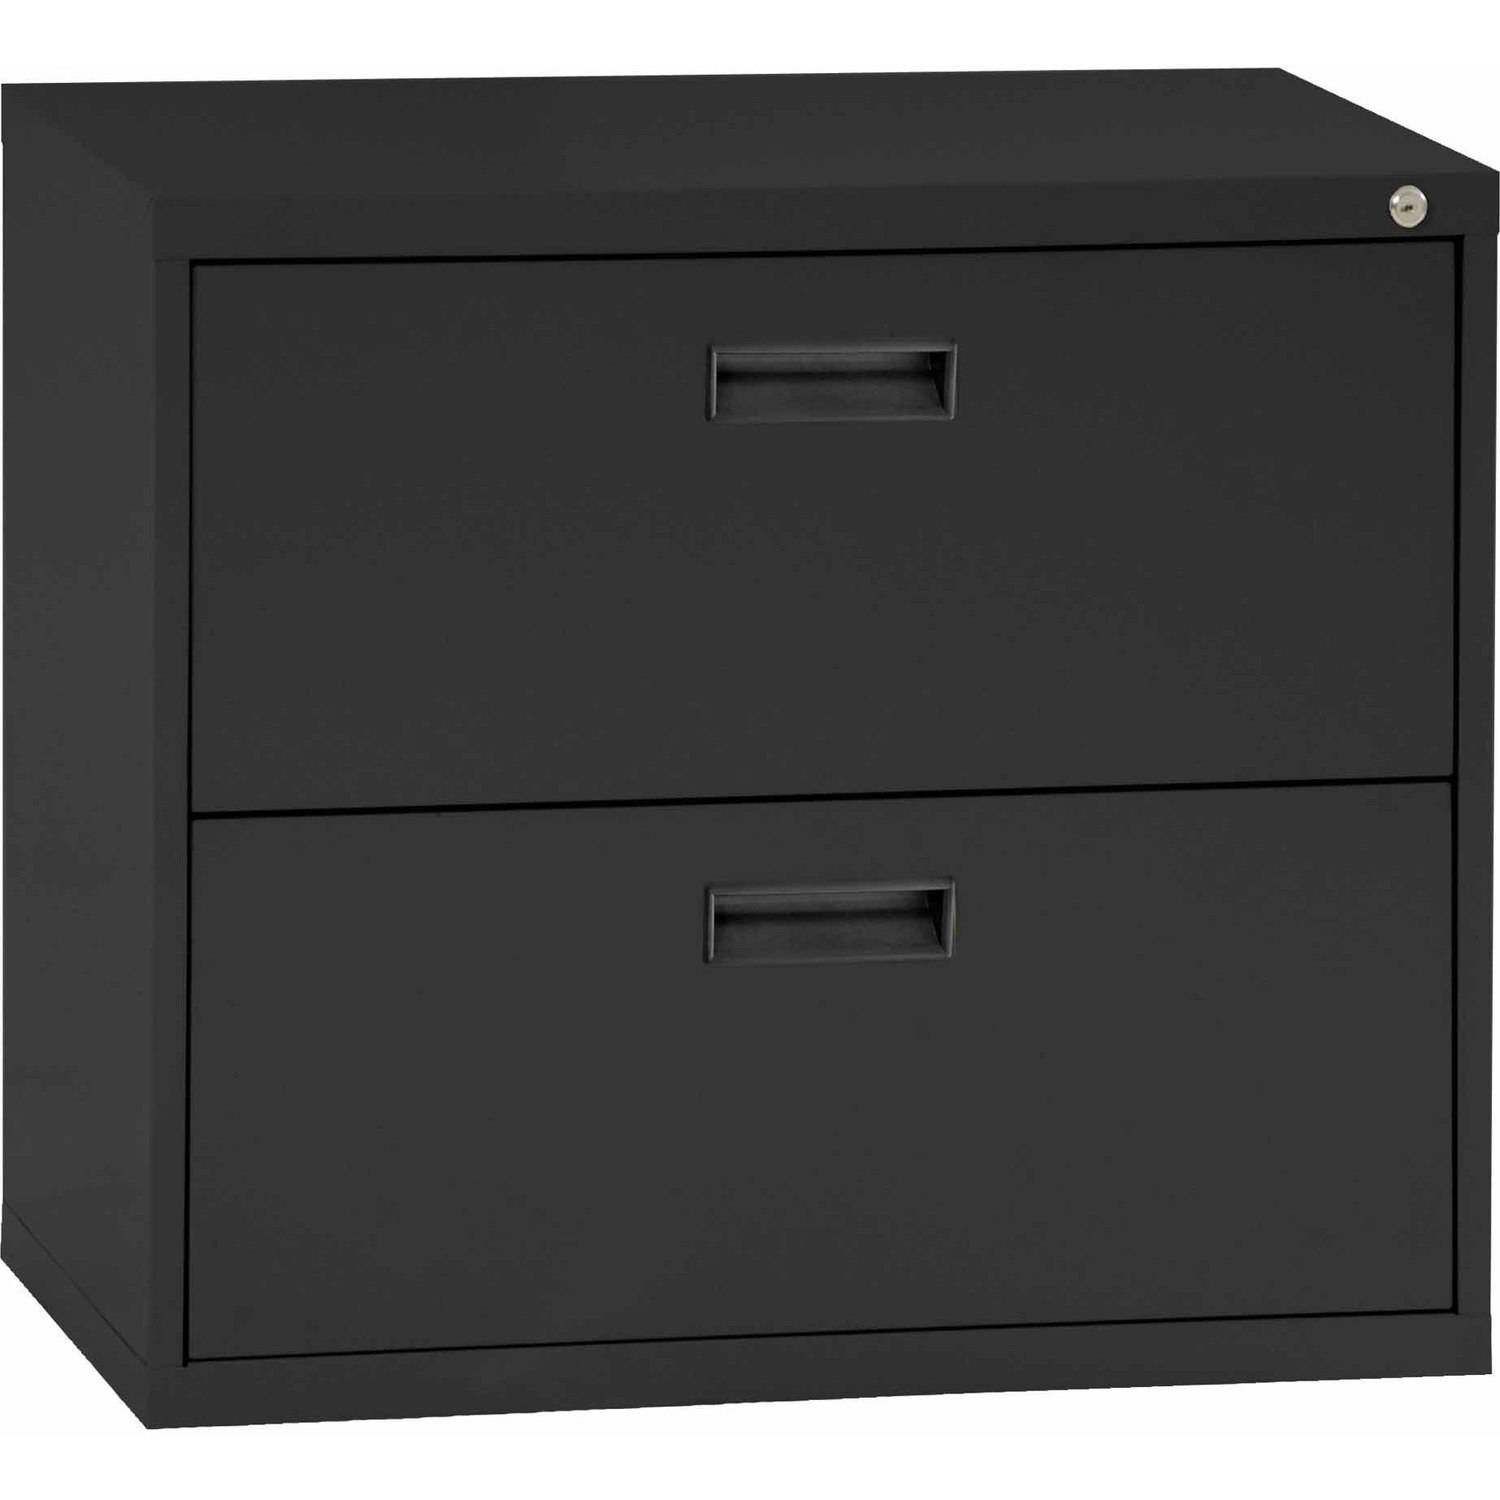 Sandusky Steel Lateral File Cabinet With Plastic Handle 2 Drawers E202l 09 within size 1500 X 1500